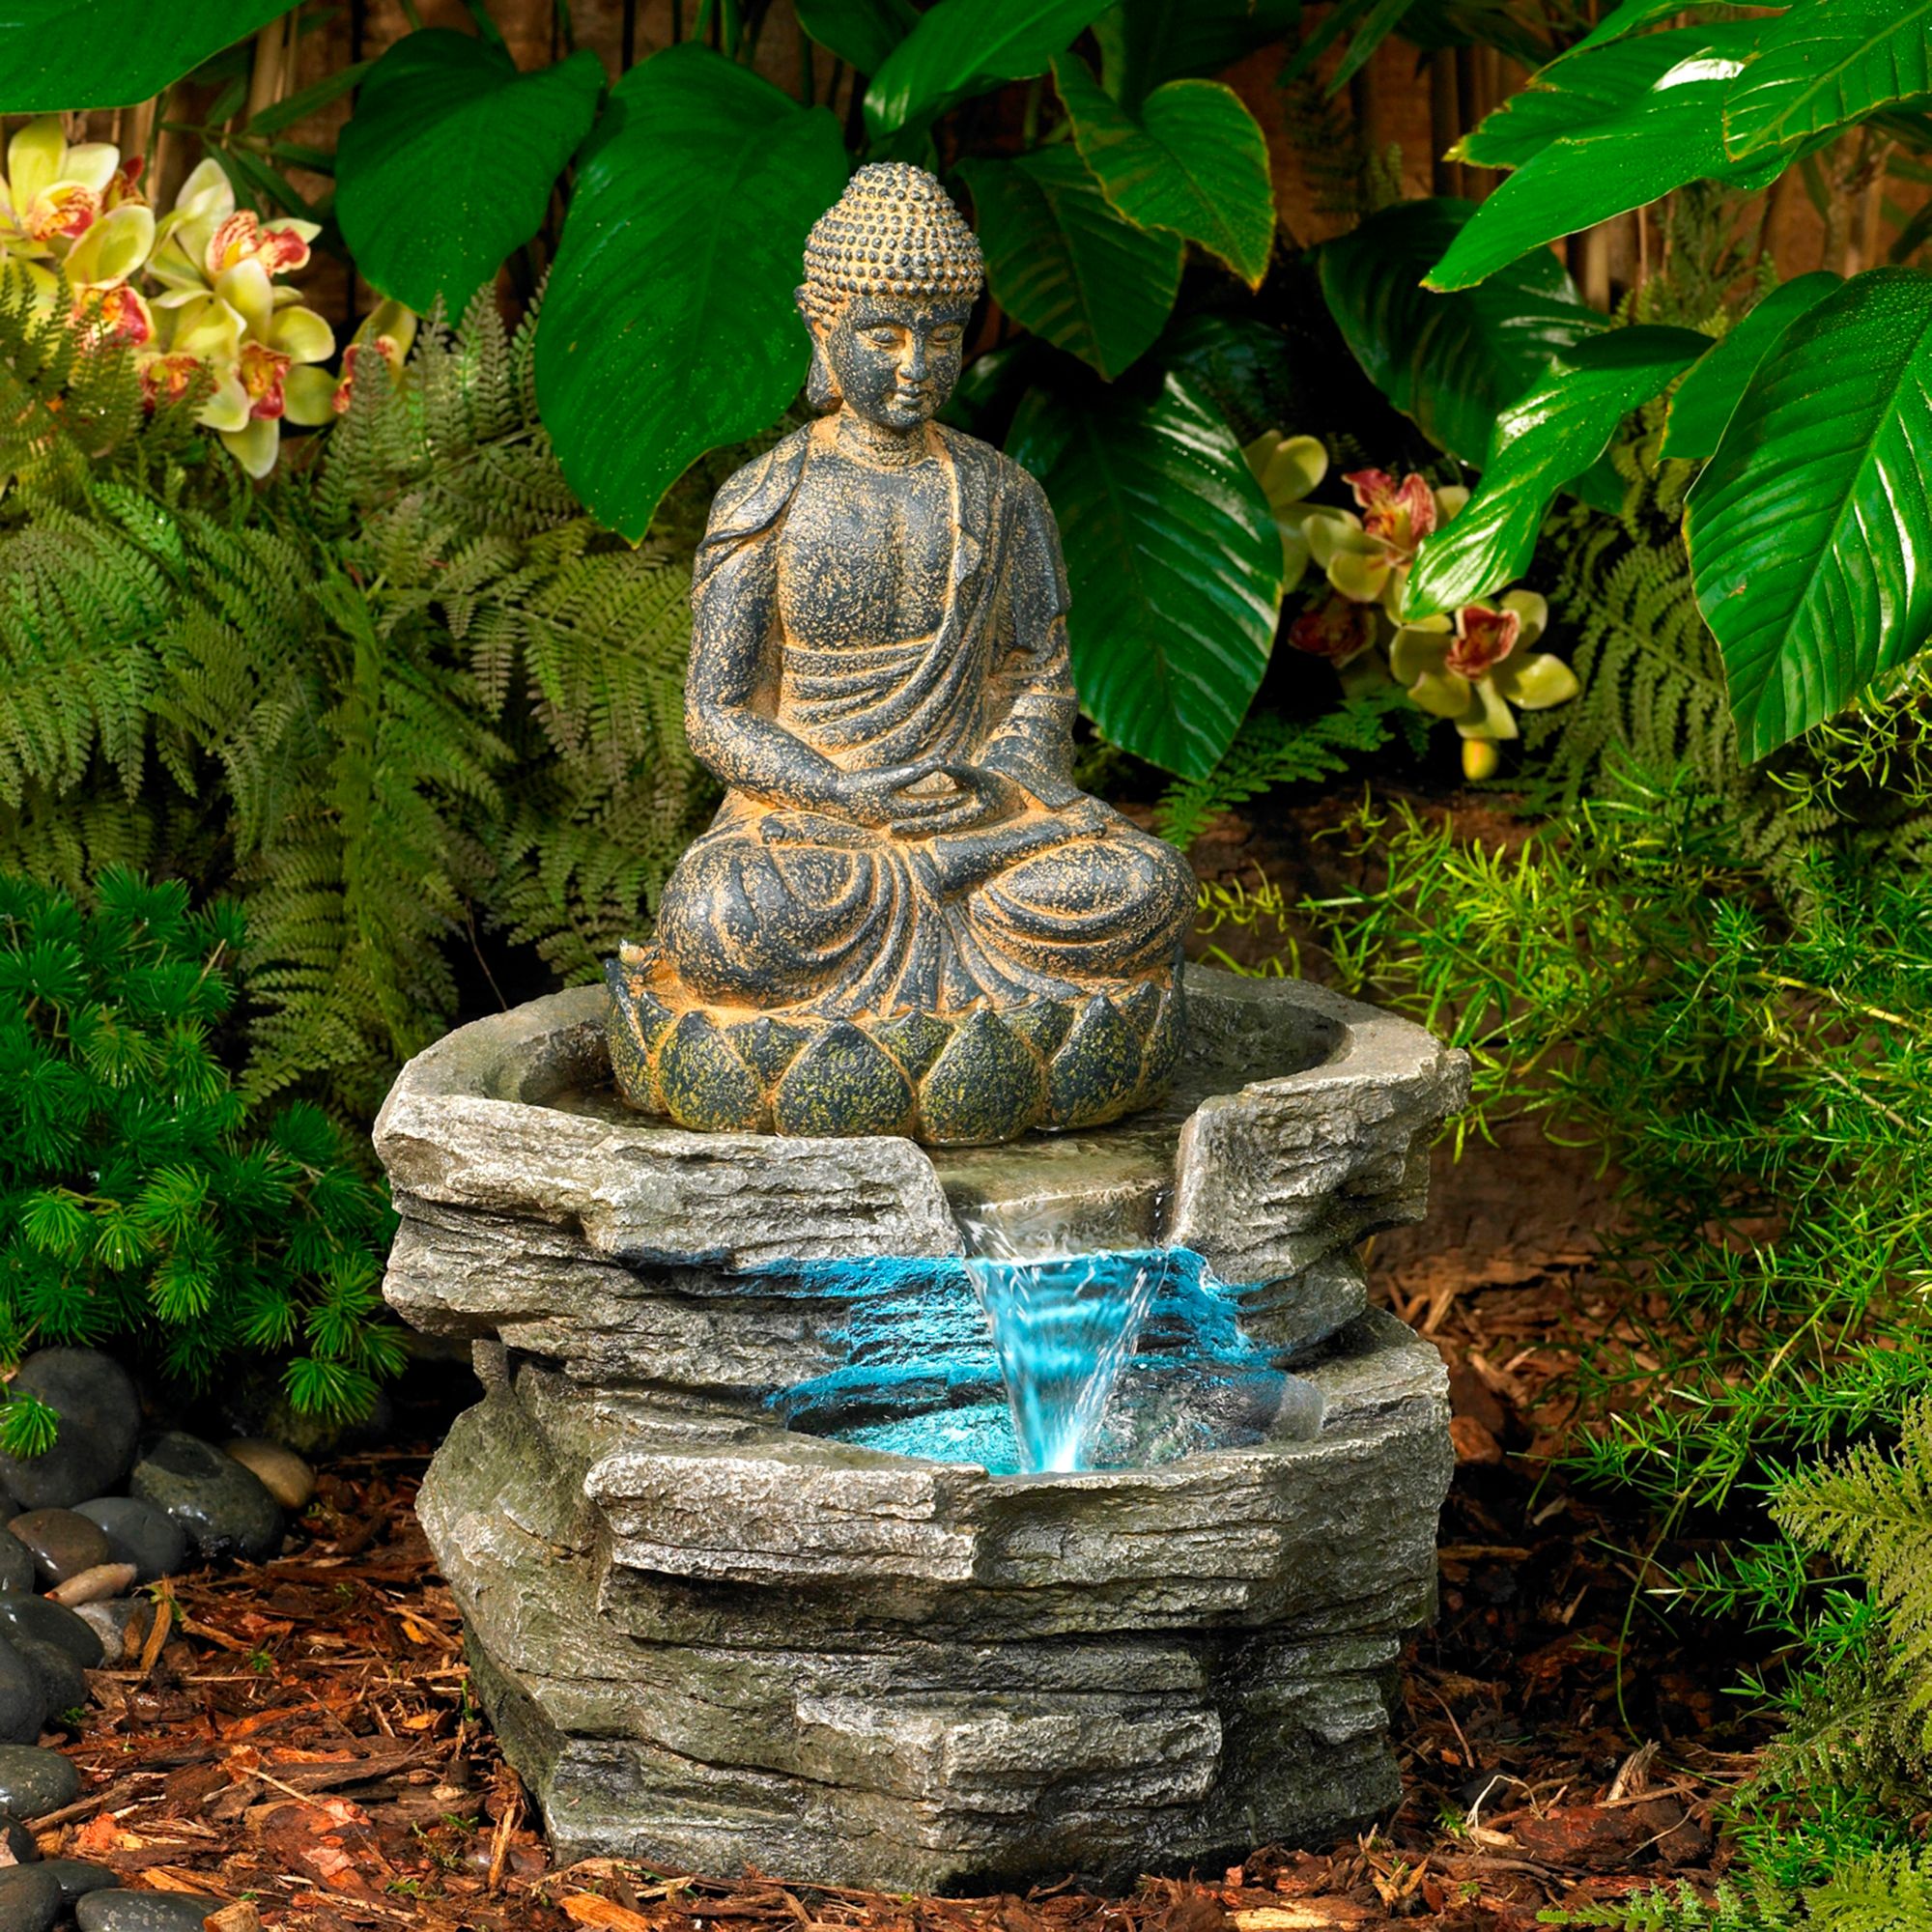 John Timberland Rustic Zen Buddha Outdoor Floor Water Fountain with Light LED 21" High Sitting for Yard Garden Patio Deck Home - image 1 of 8